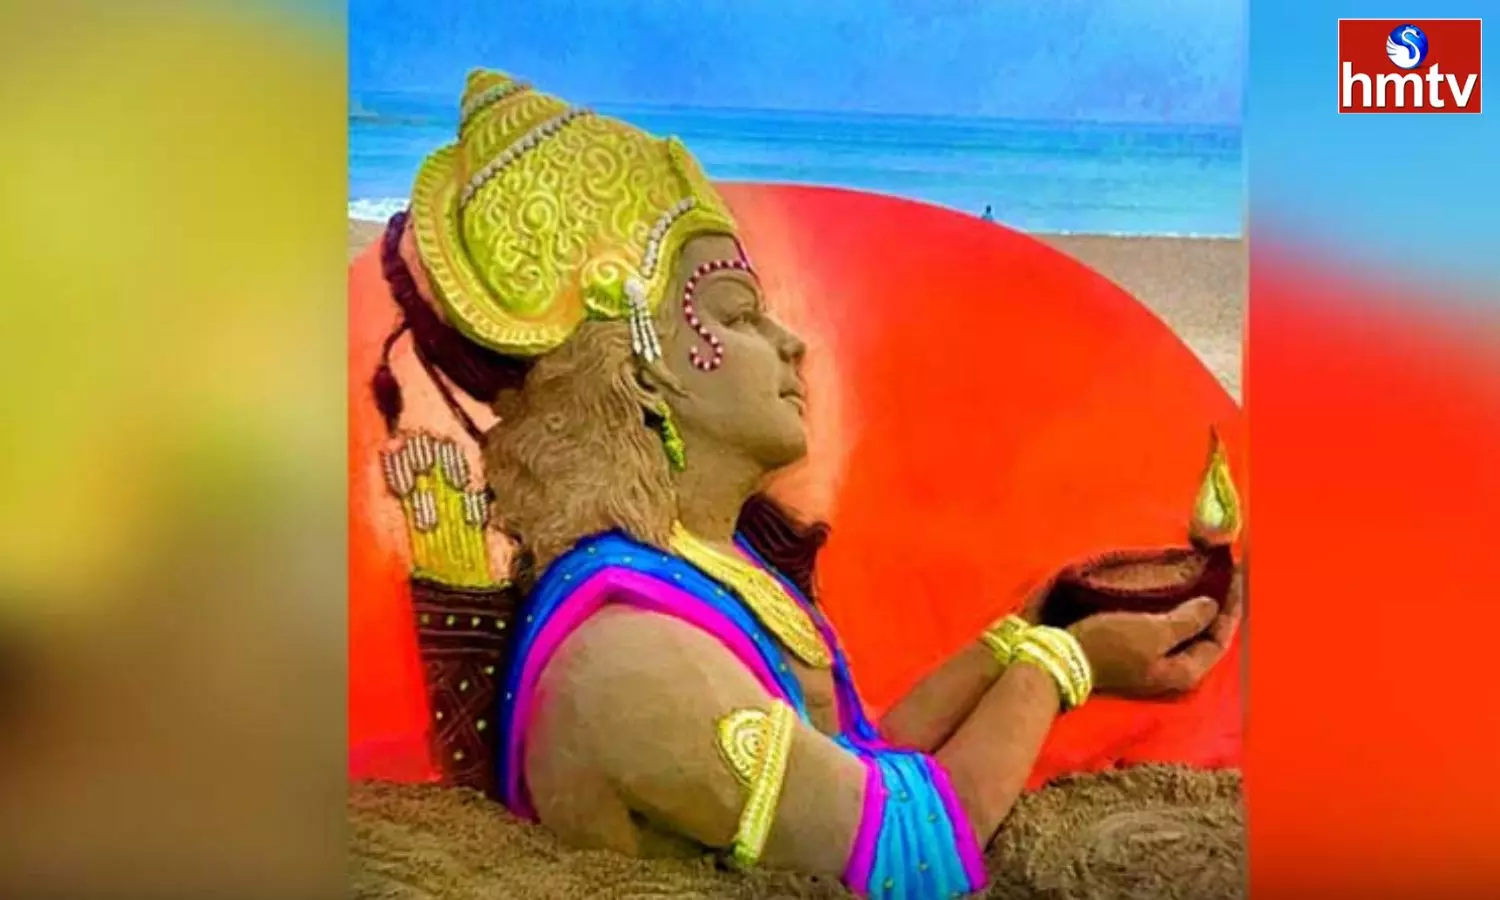 Sudarshan Patnaik Made A Lamp Along With An Image Of Lord Ram Out Of Sand On The Shores Of Puri In Odisha